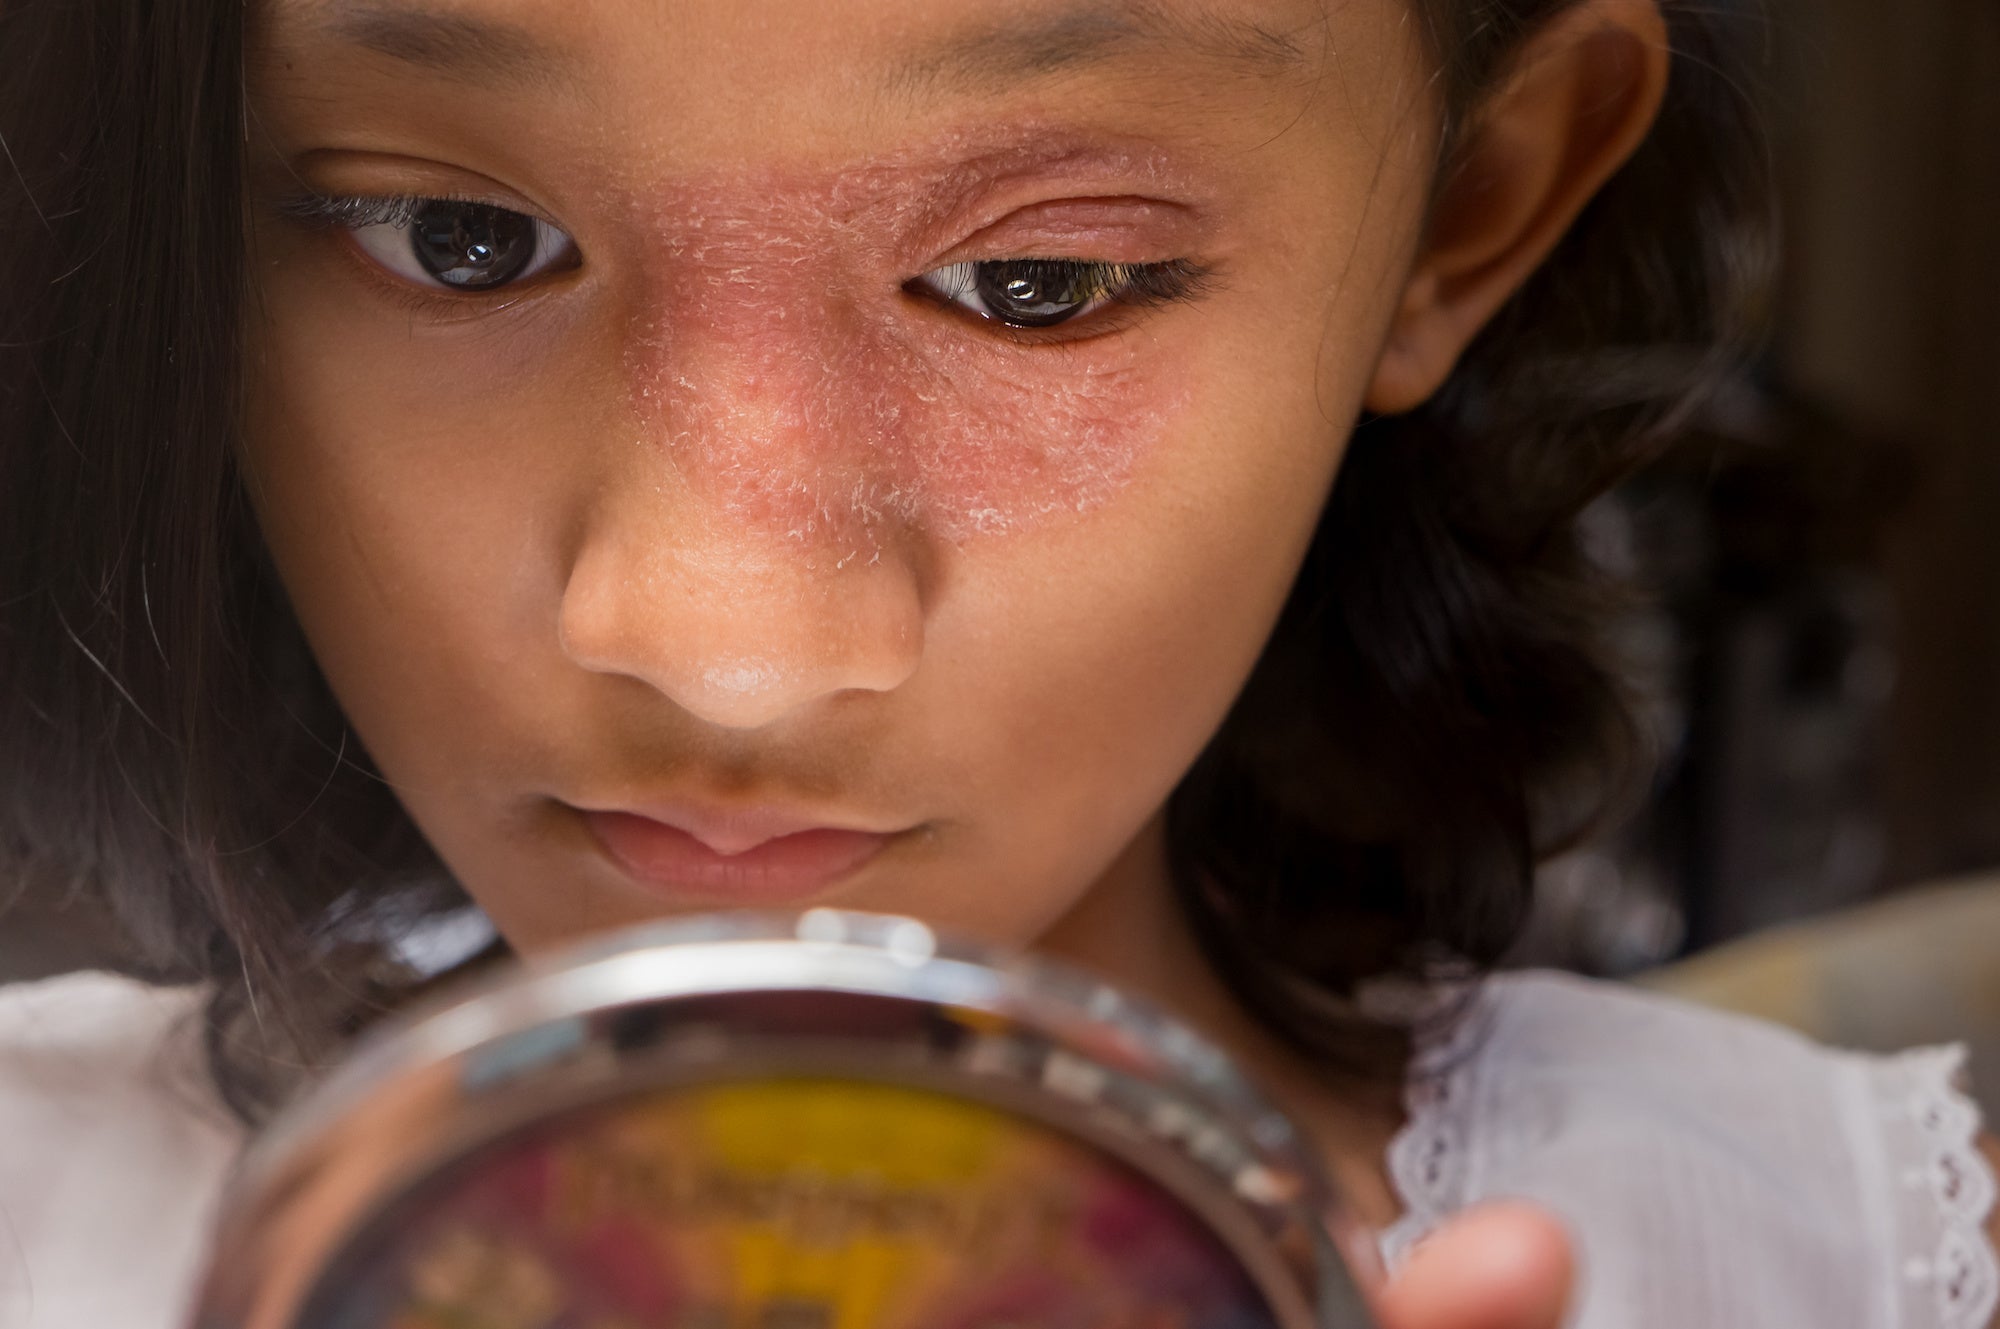 Getting Under the Skin | The Link Between Skin Conditions and Childhood Bullying